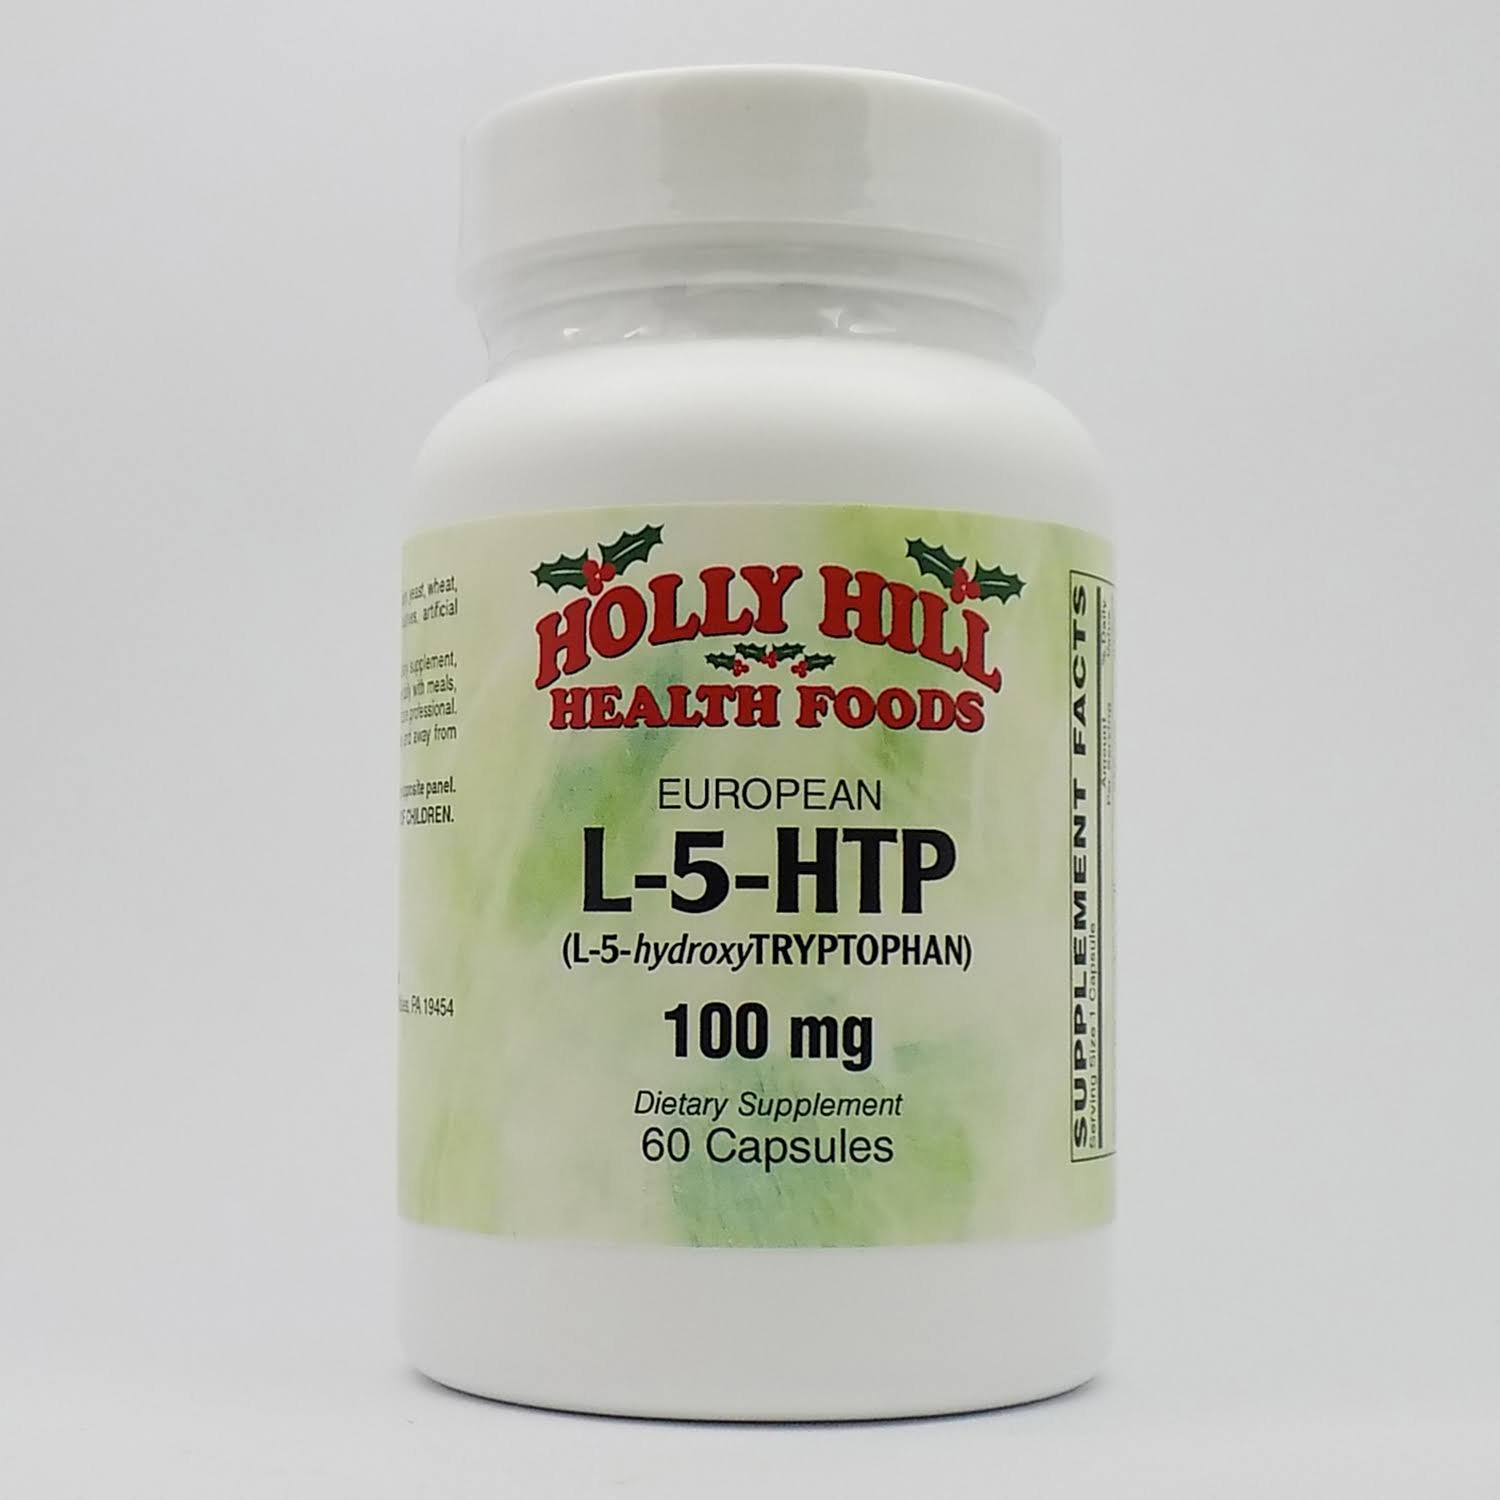 Holly Hill Health Foods, L-5-HTP 100 mg, 60 Capsules